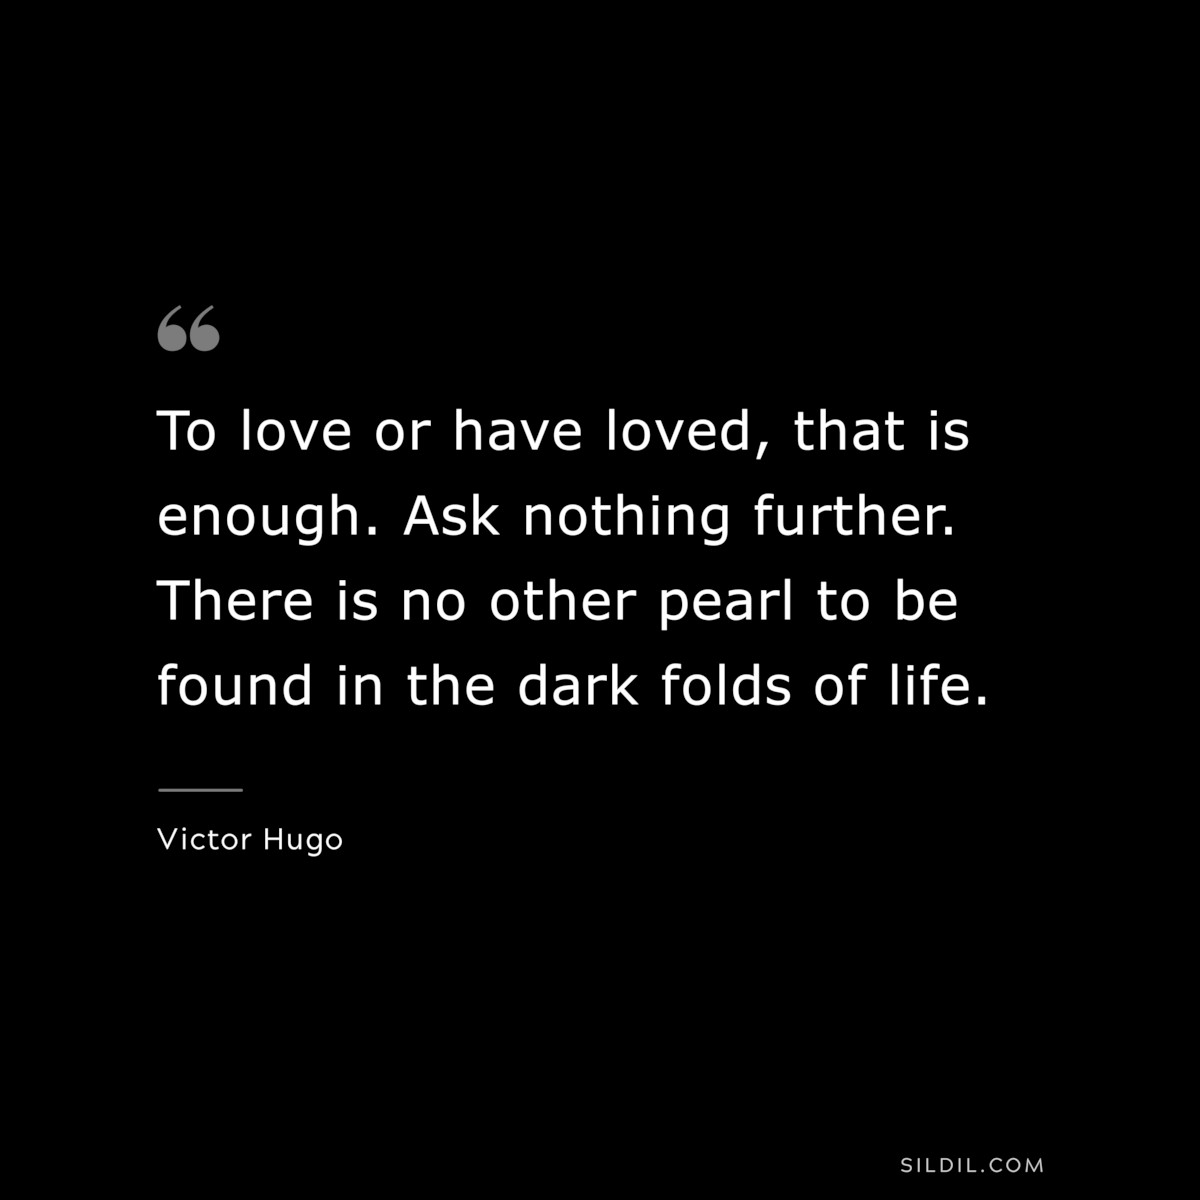 To love or have loved, that is enough. Ask nothing further. There is no other pearl to be found in the dark folds of life.― Victor Hugo